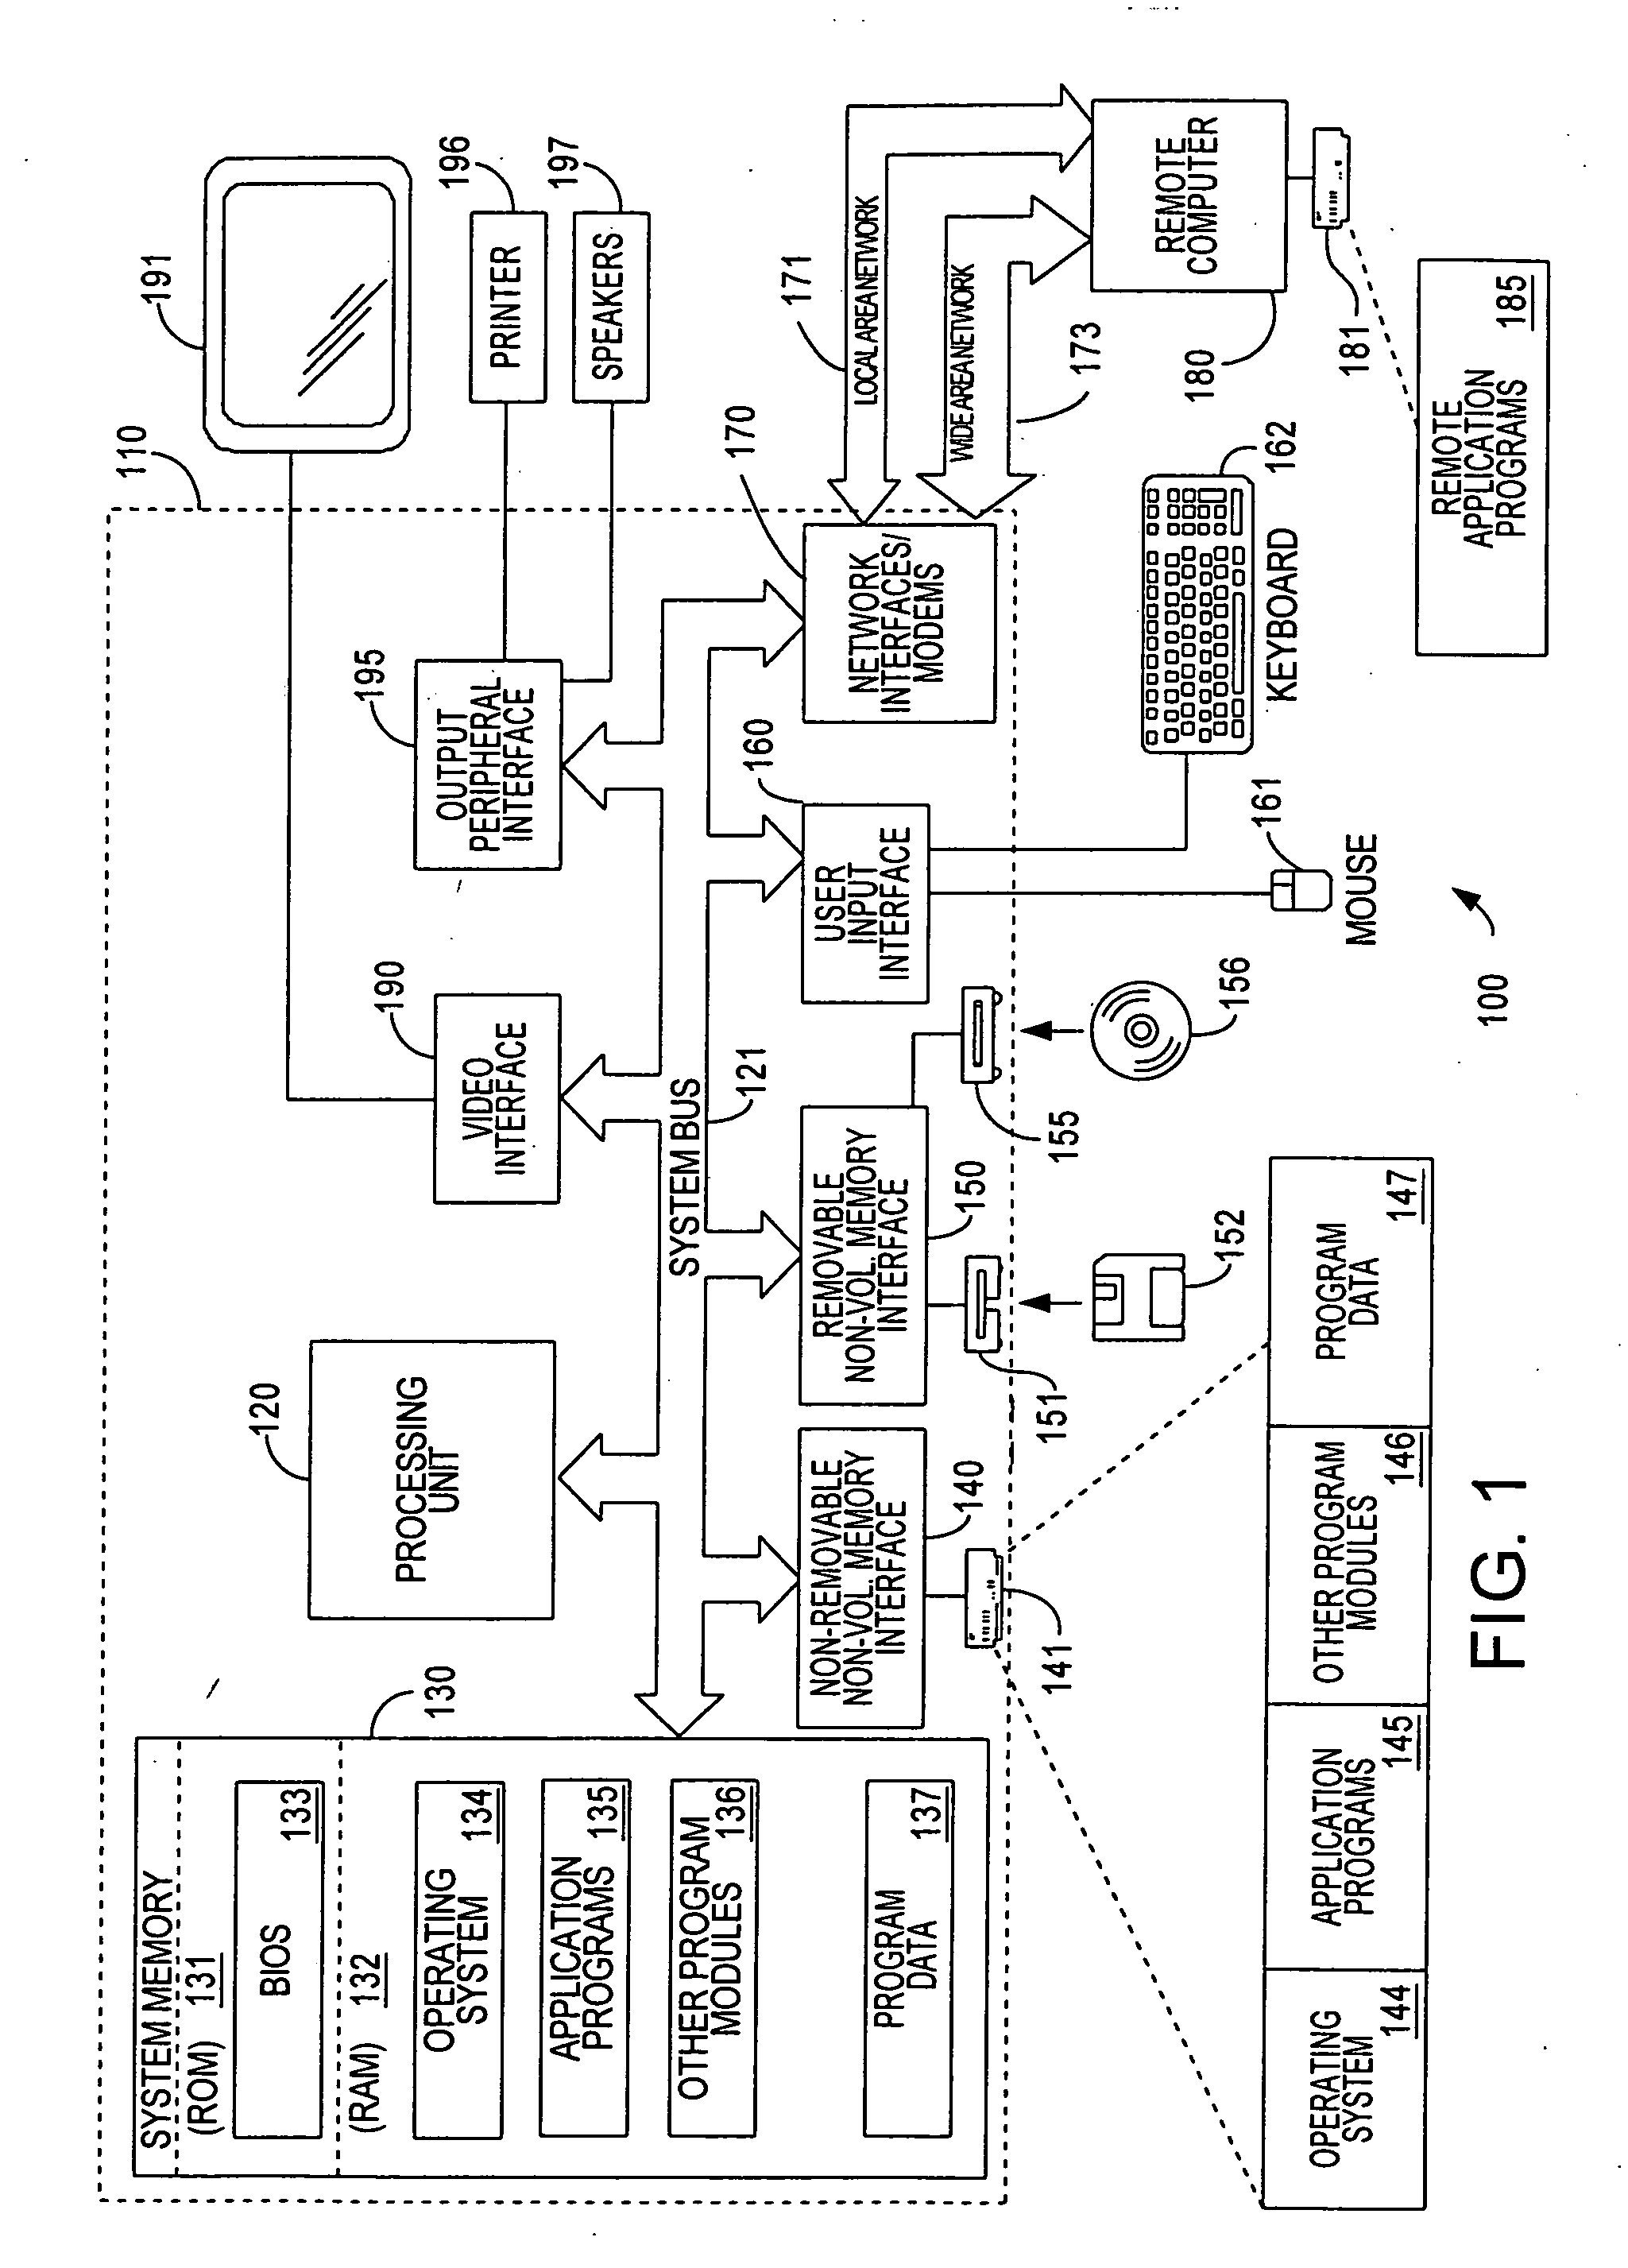 User based communication mode selection on a device capable of carrying out network communications.